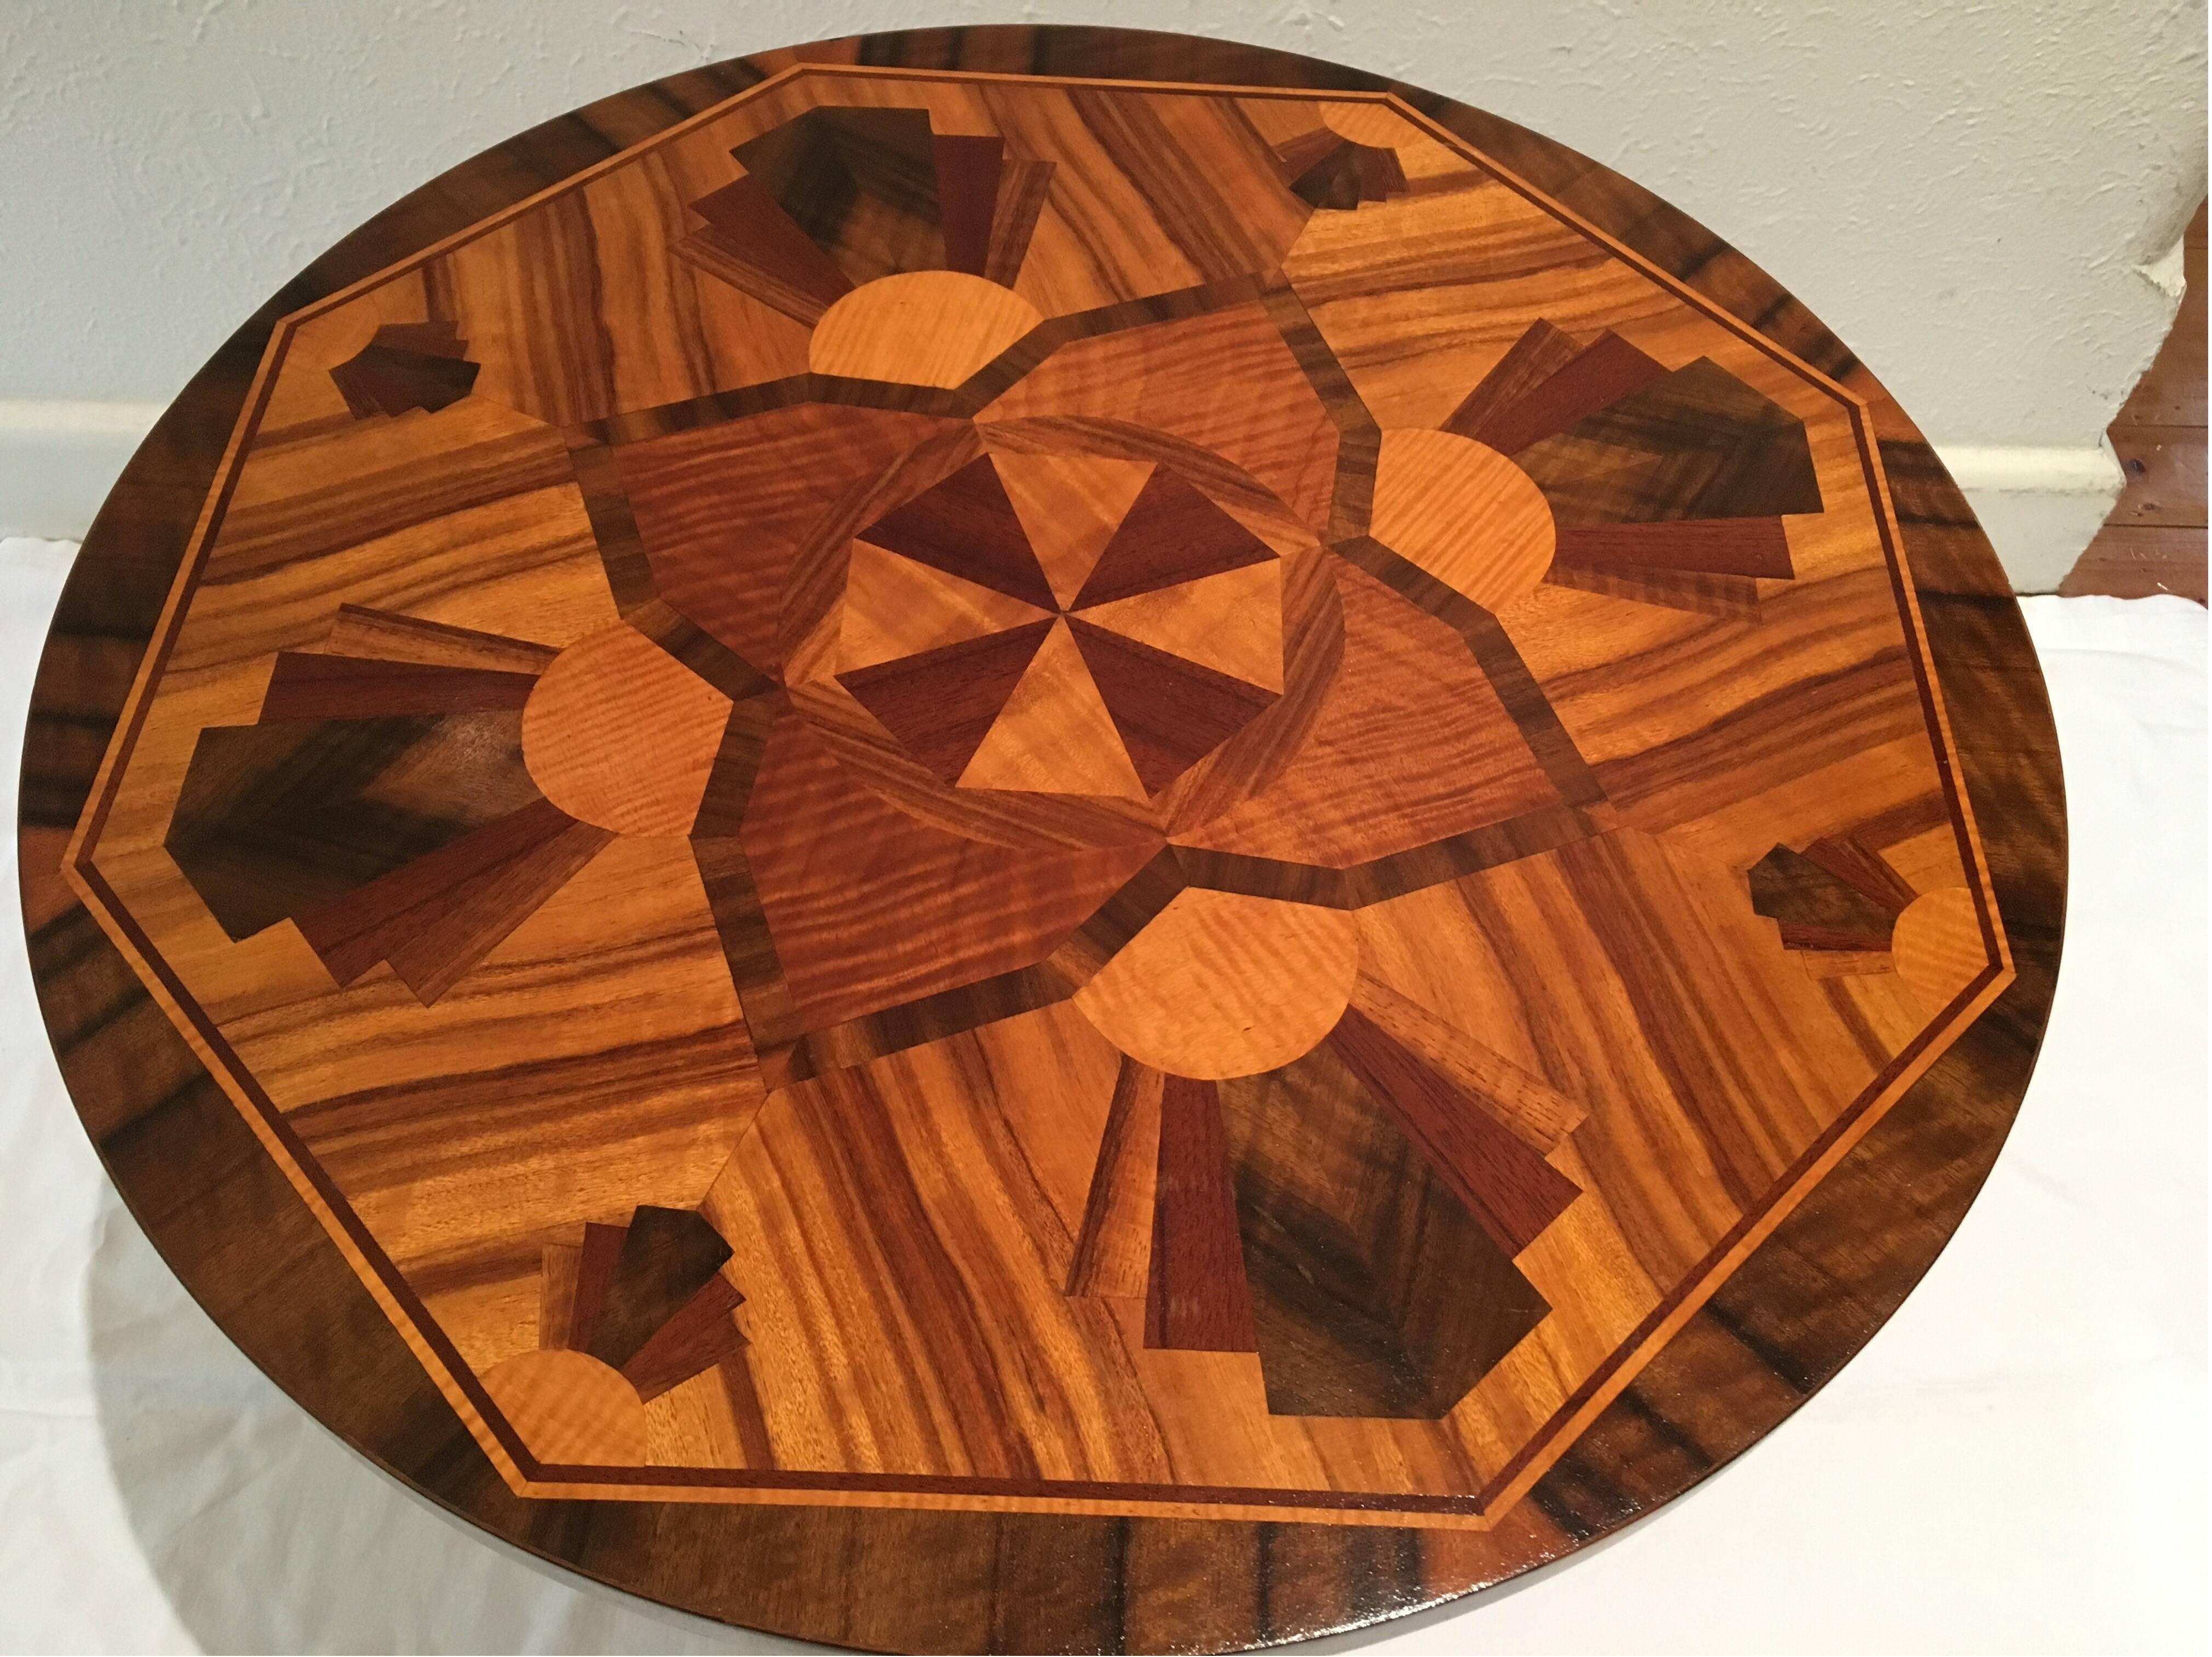 Australian Art Deco side table circa 1930s with decorative marquetry inlay.

An exceptionally high quality piece, made of beautiful walnut with intricate Art Deco tabletop design, in excellent condition.